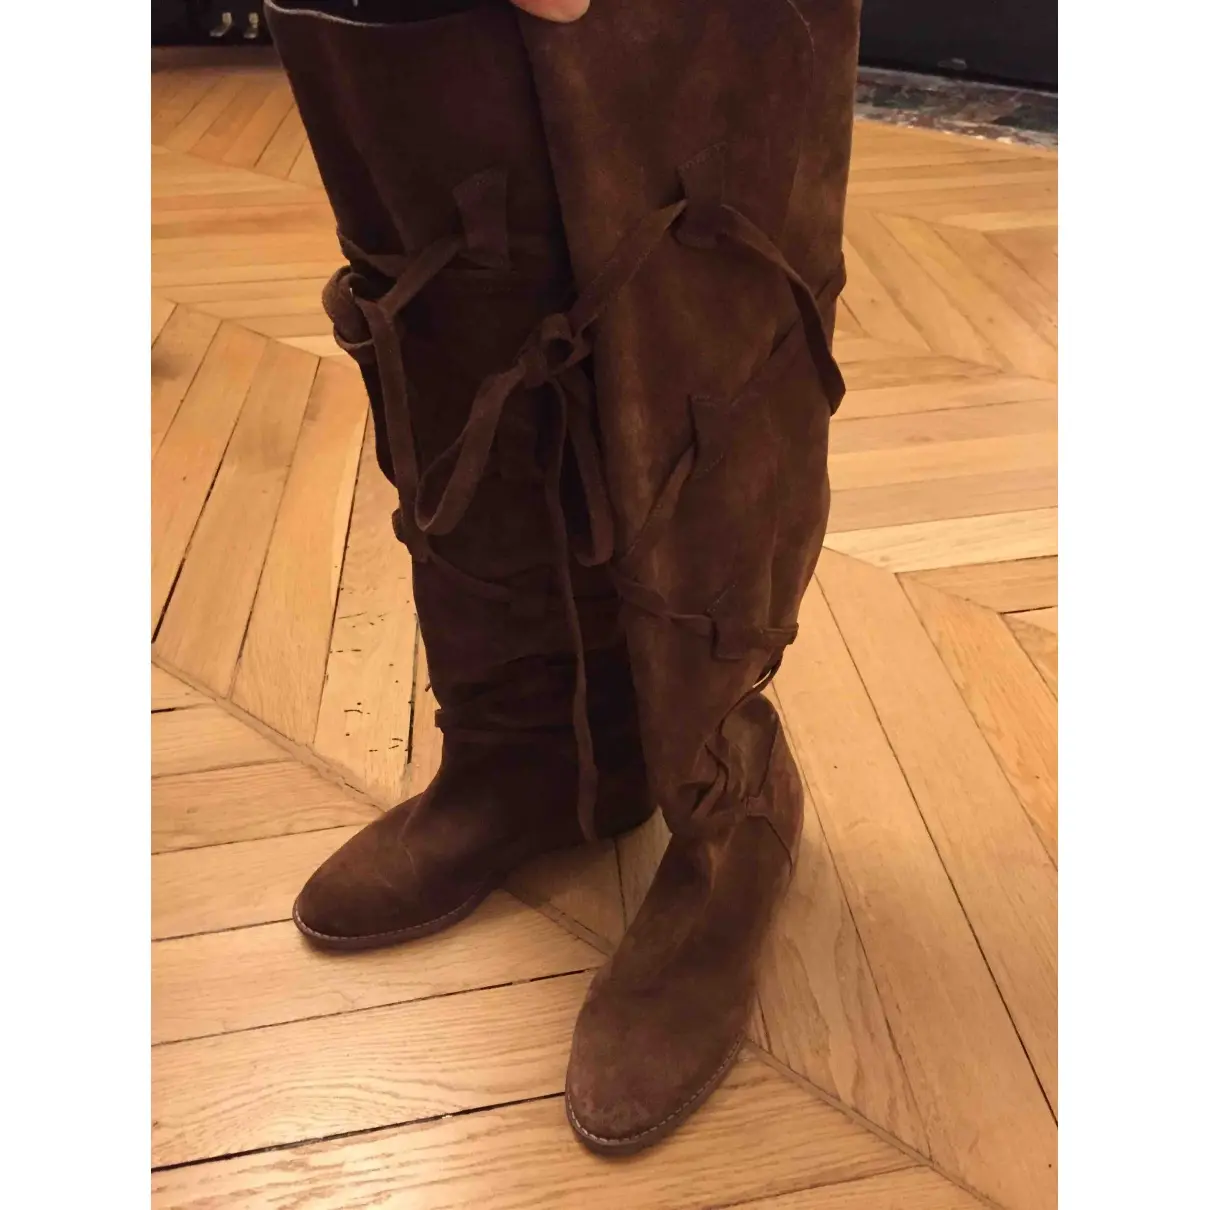 Tila March Lace up boots for sale